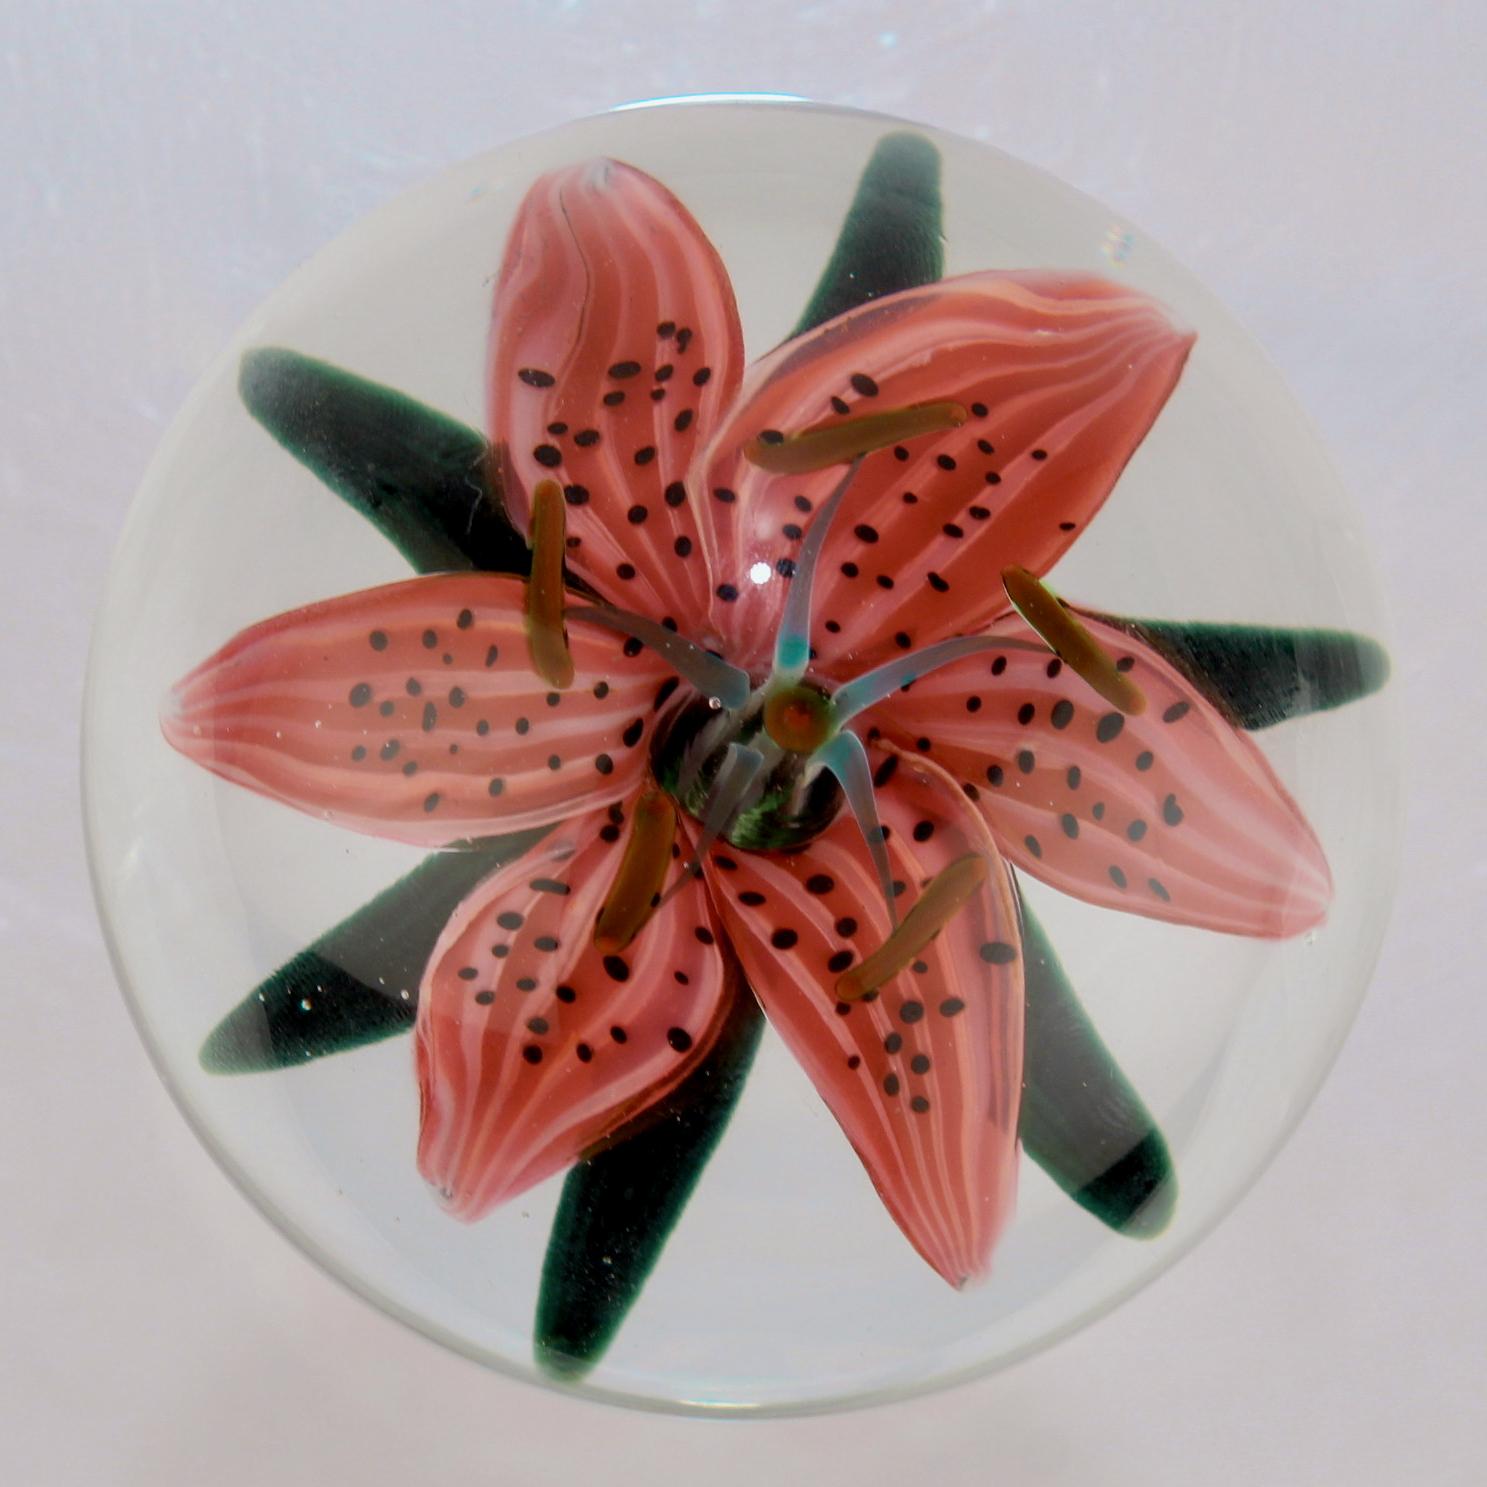 A fine Lundberg Studios pedastal paperweight. 

By Steven Lundberg.

With an upright tiger lily lampwork flower.

Signed and dated at the foot.

Simply a fine paperweight!

Date:
1986

Overall condition:
It is in overall very very